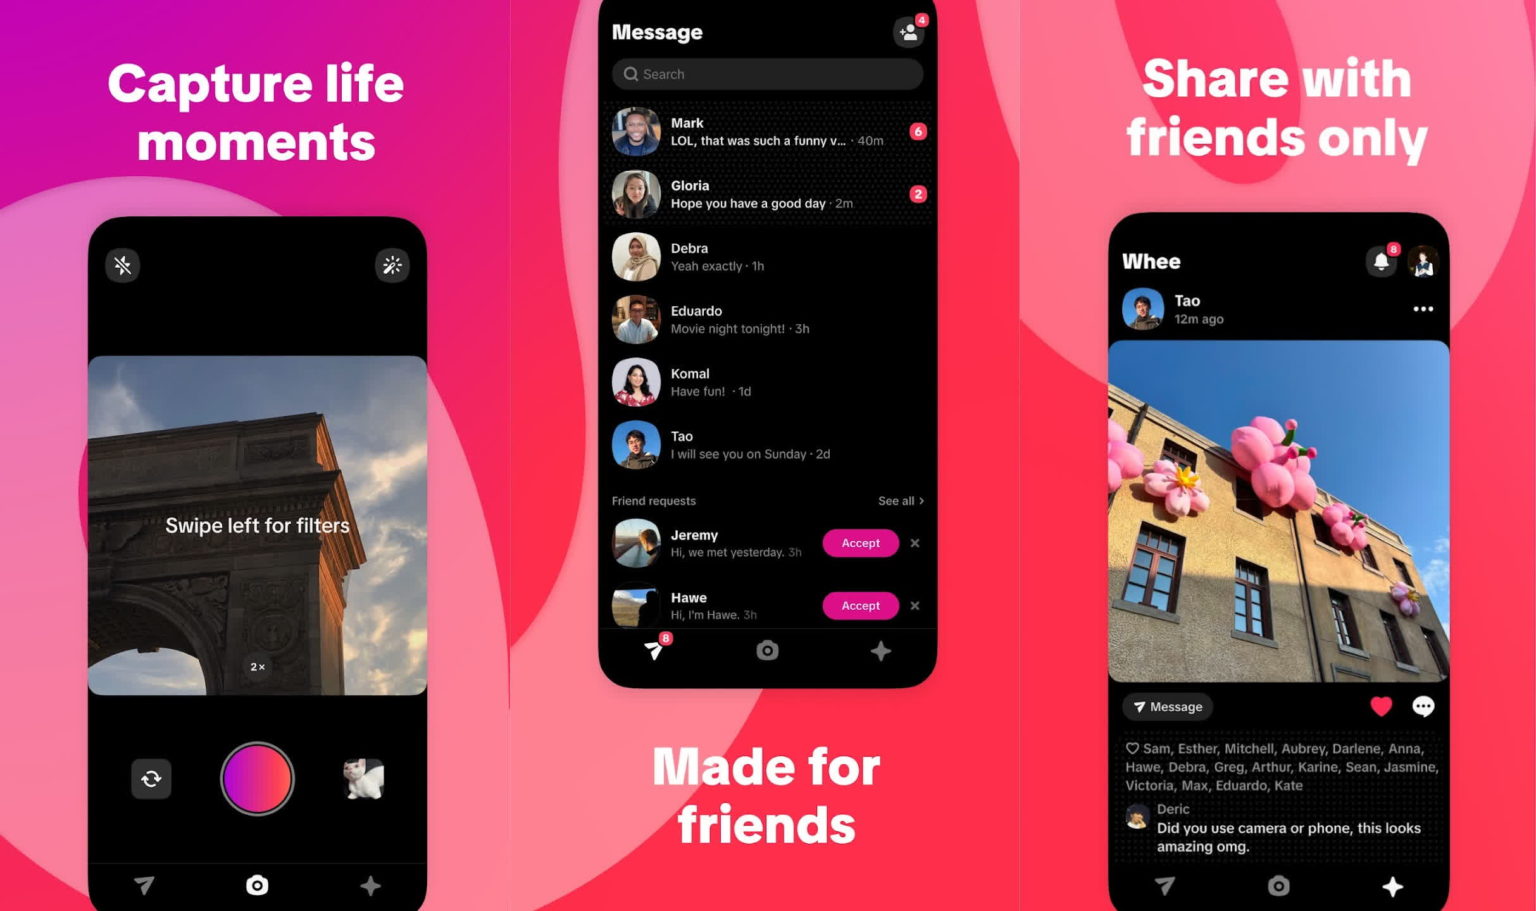 TikTok owner ByteDance is testing an Instagram competitor called Whee